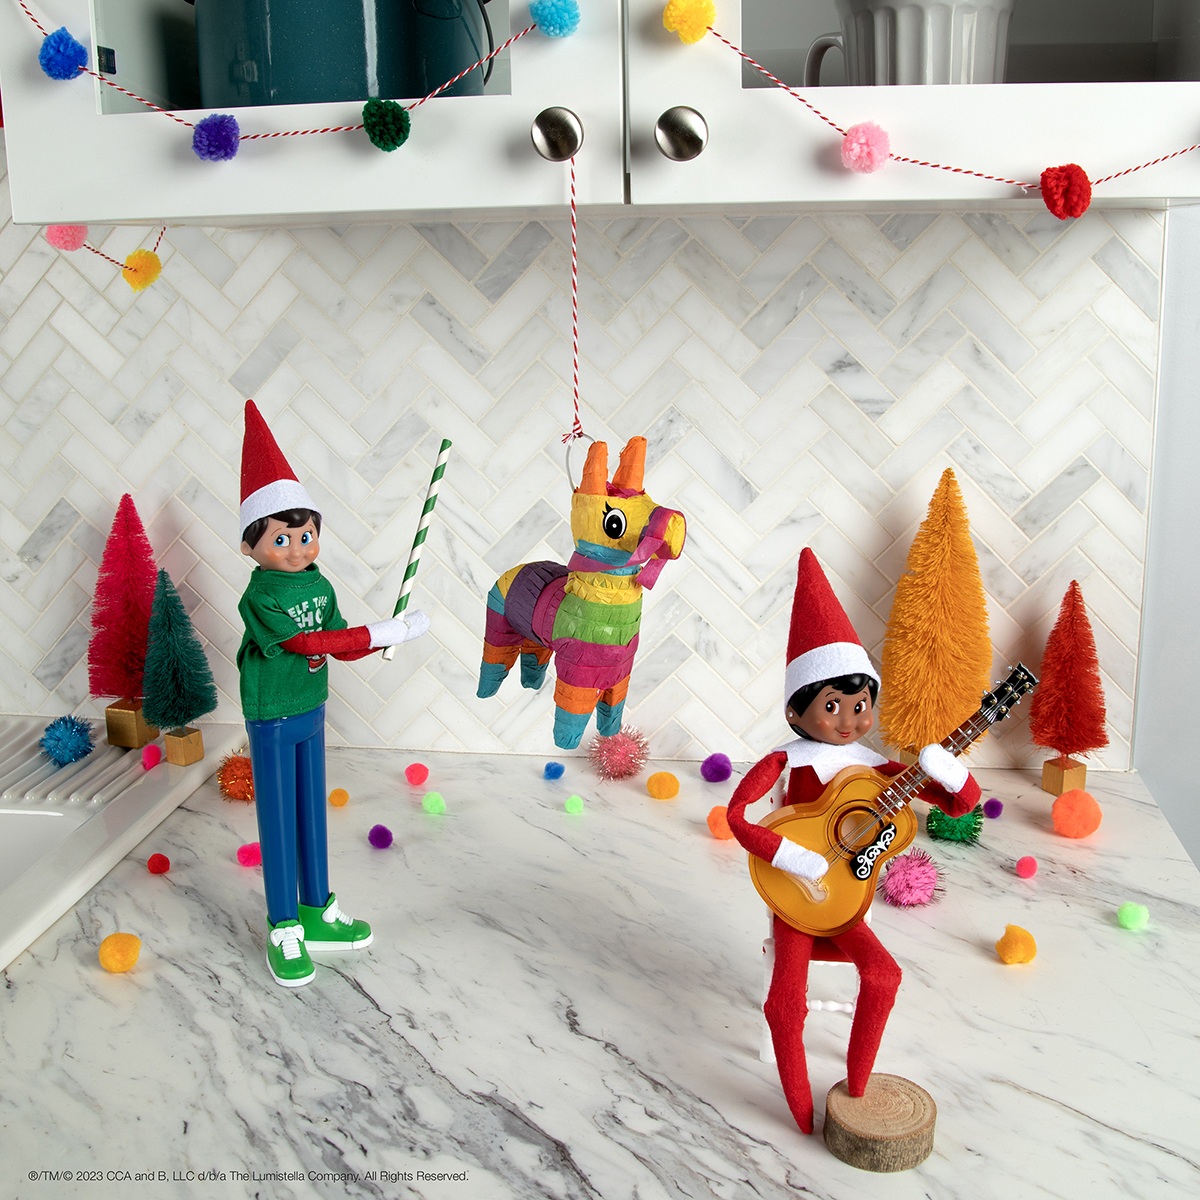 The Elf on the Shelf and friend swinging a small bat at a pinata and playing an elf-sized guitar.
